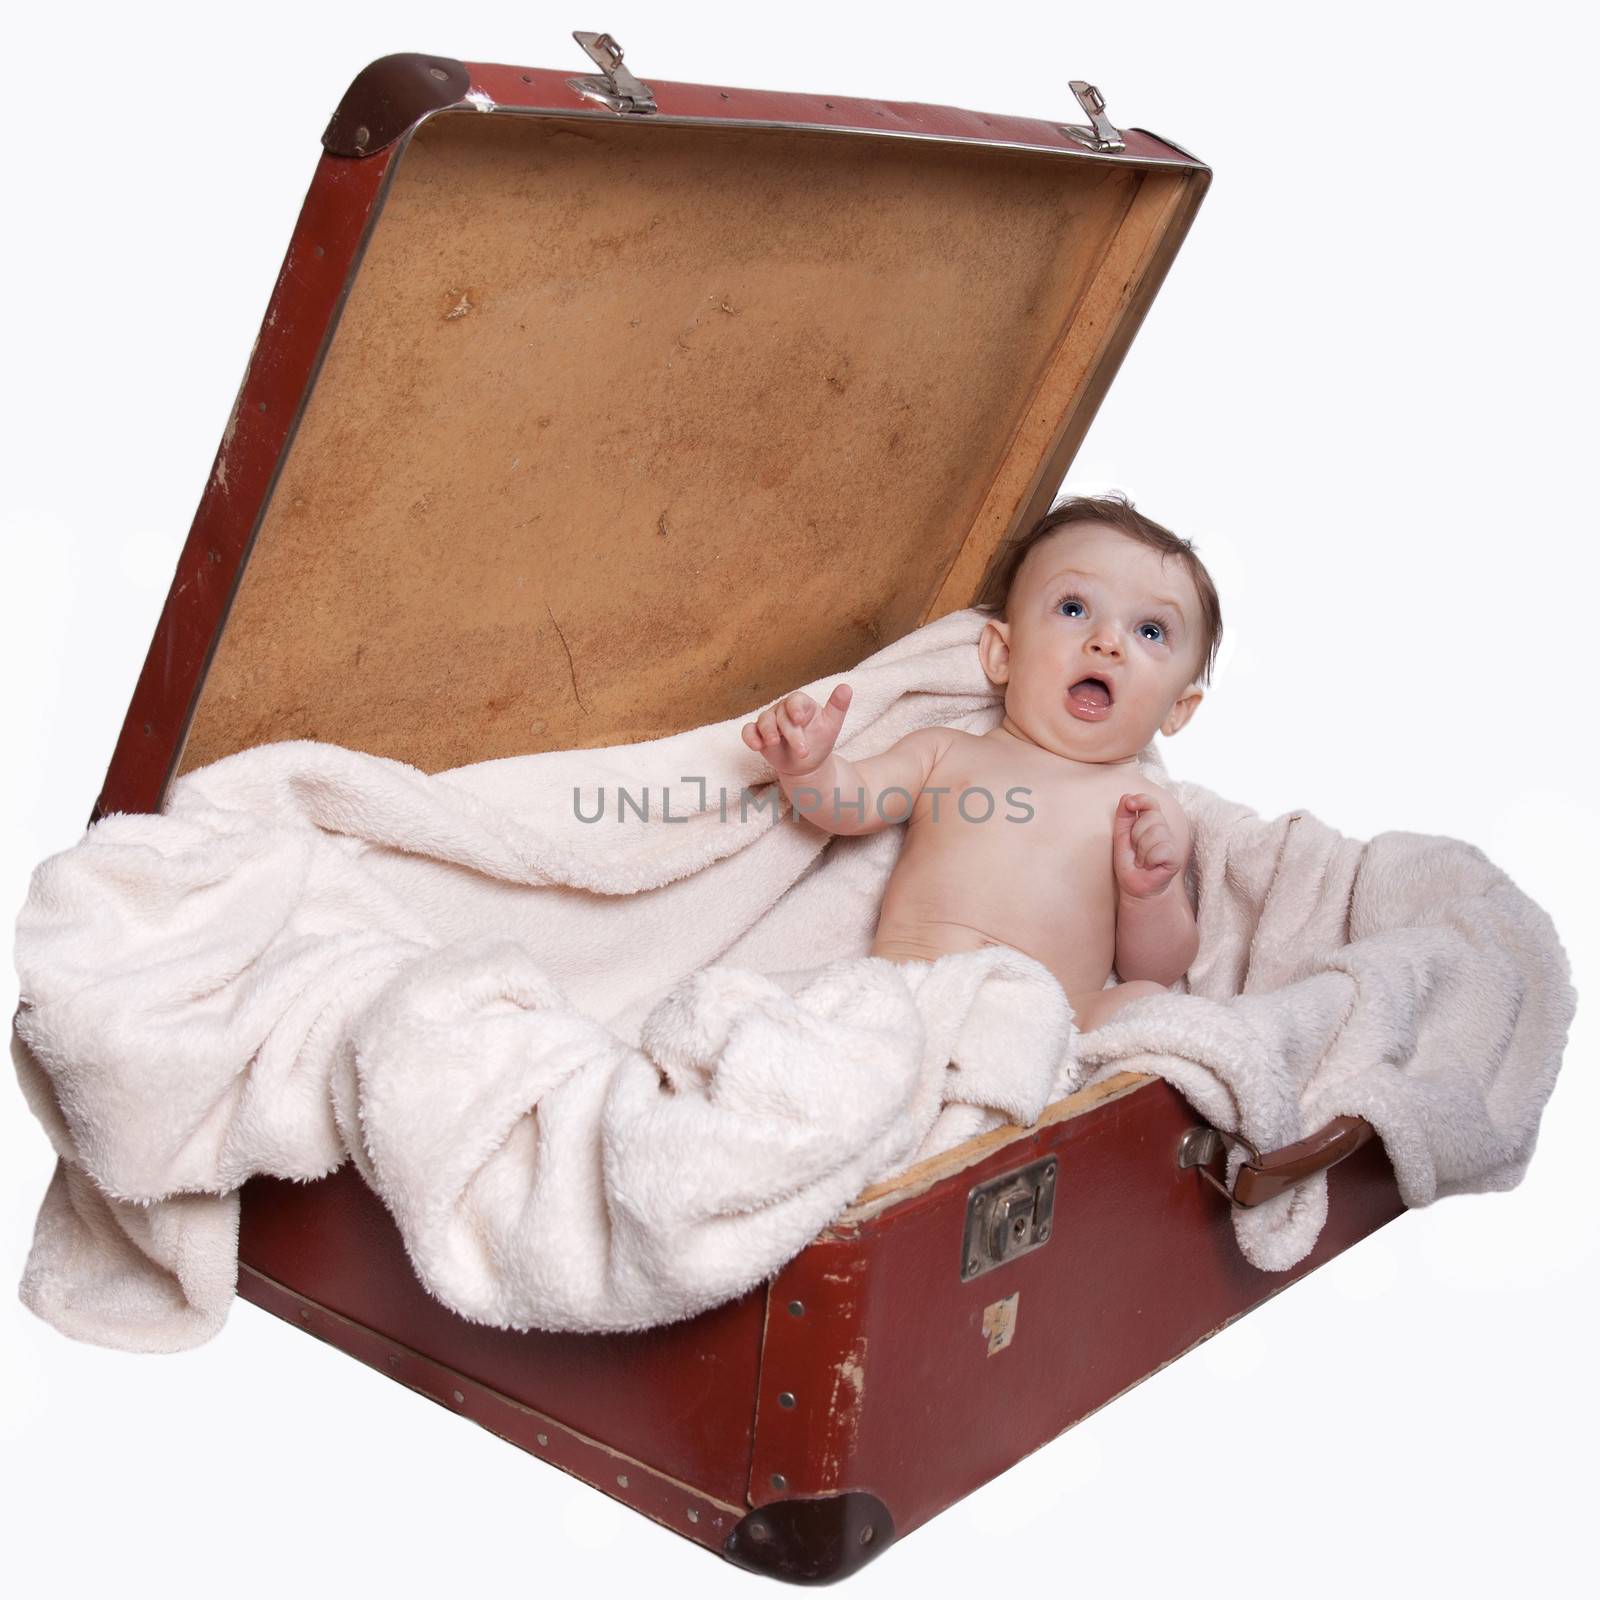 Little baby boy sitting naked on a blanket, in the old suitcases, on a white background